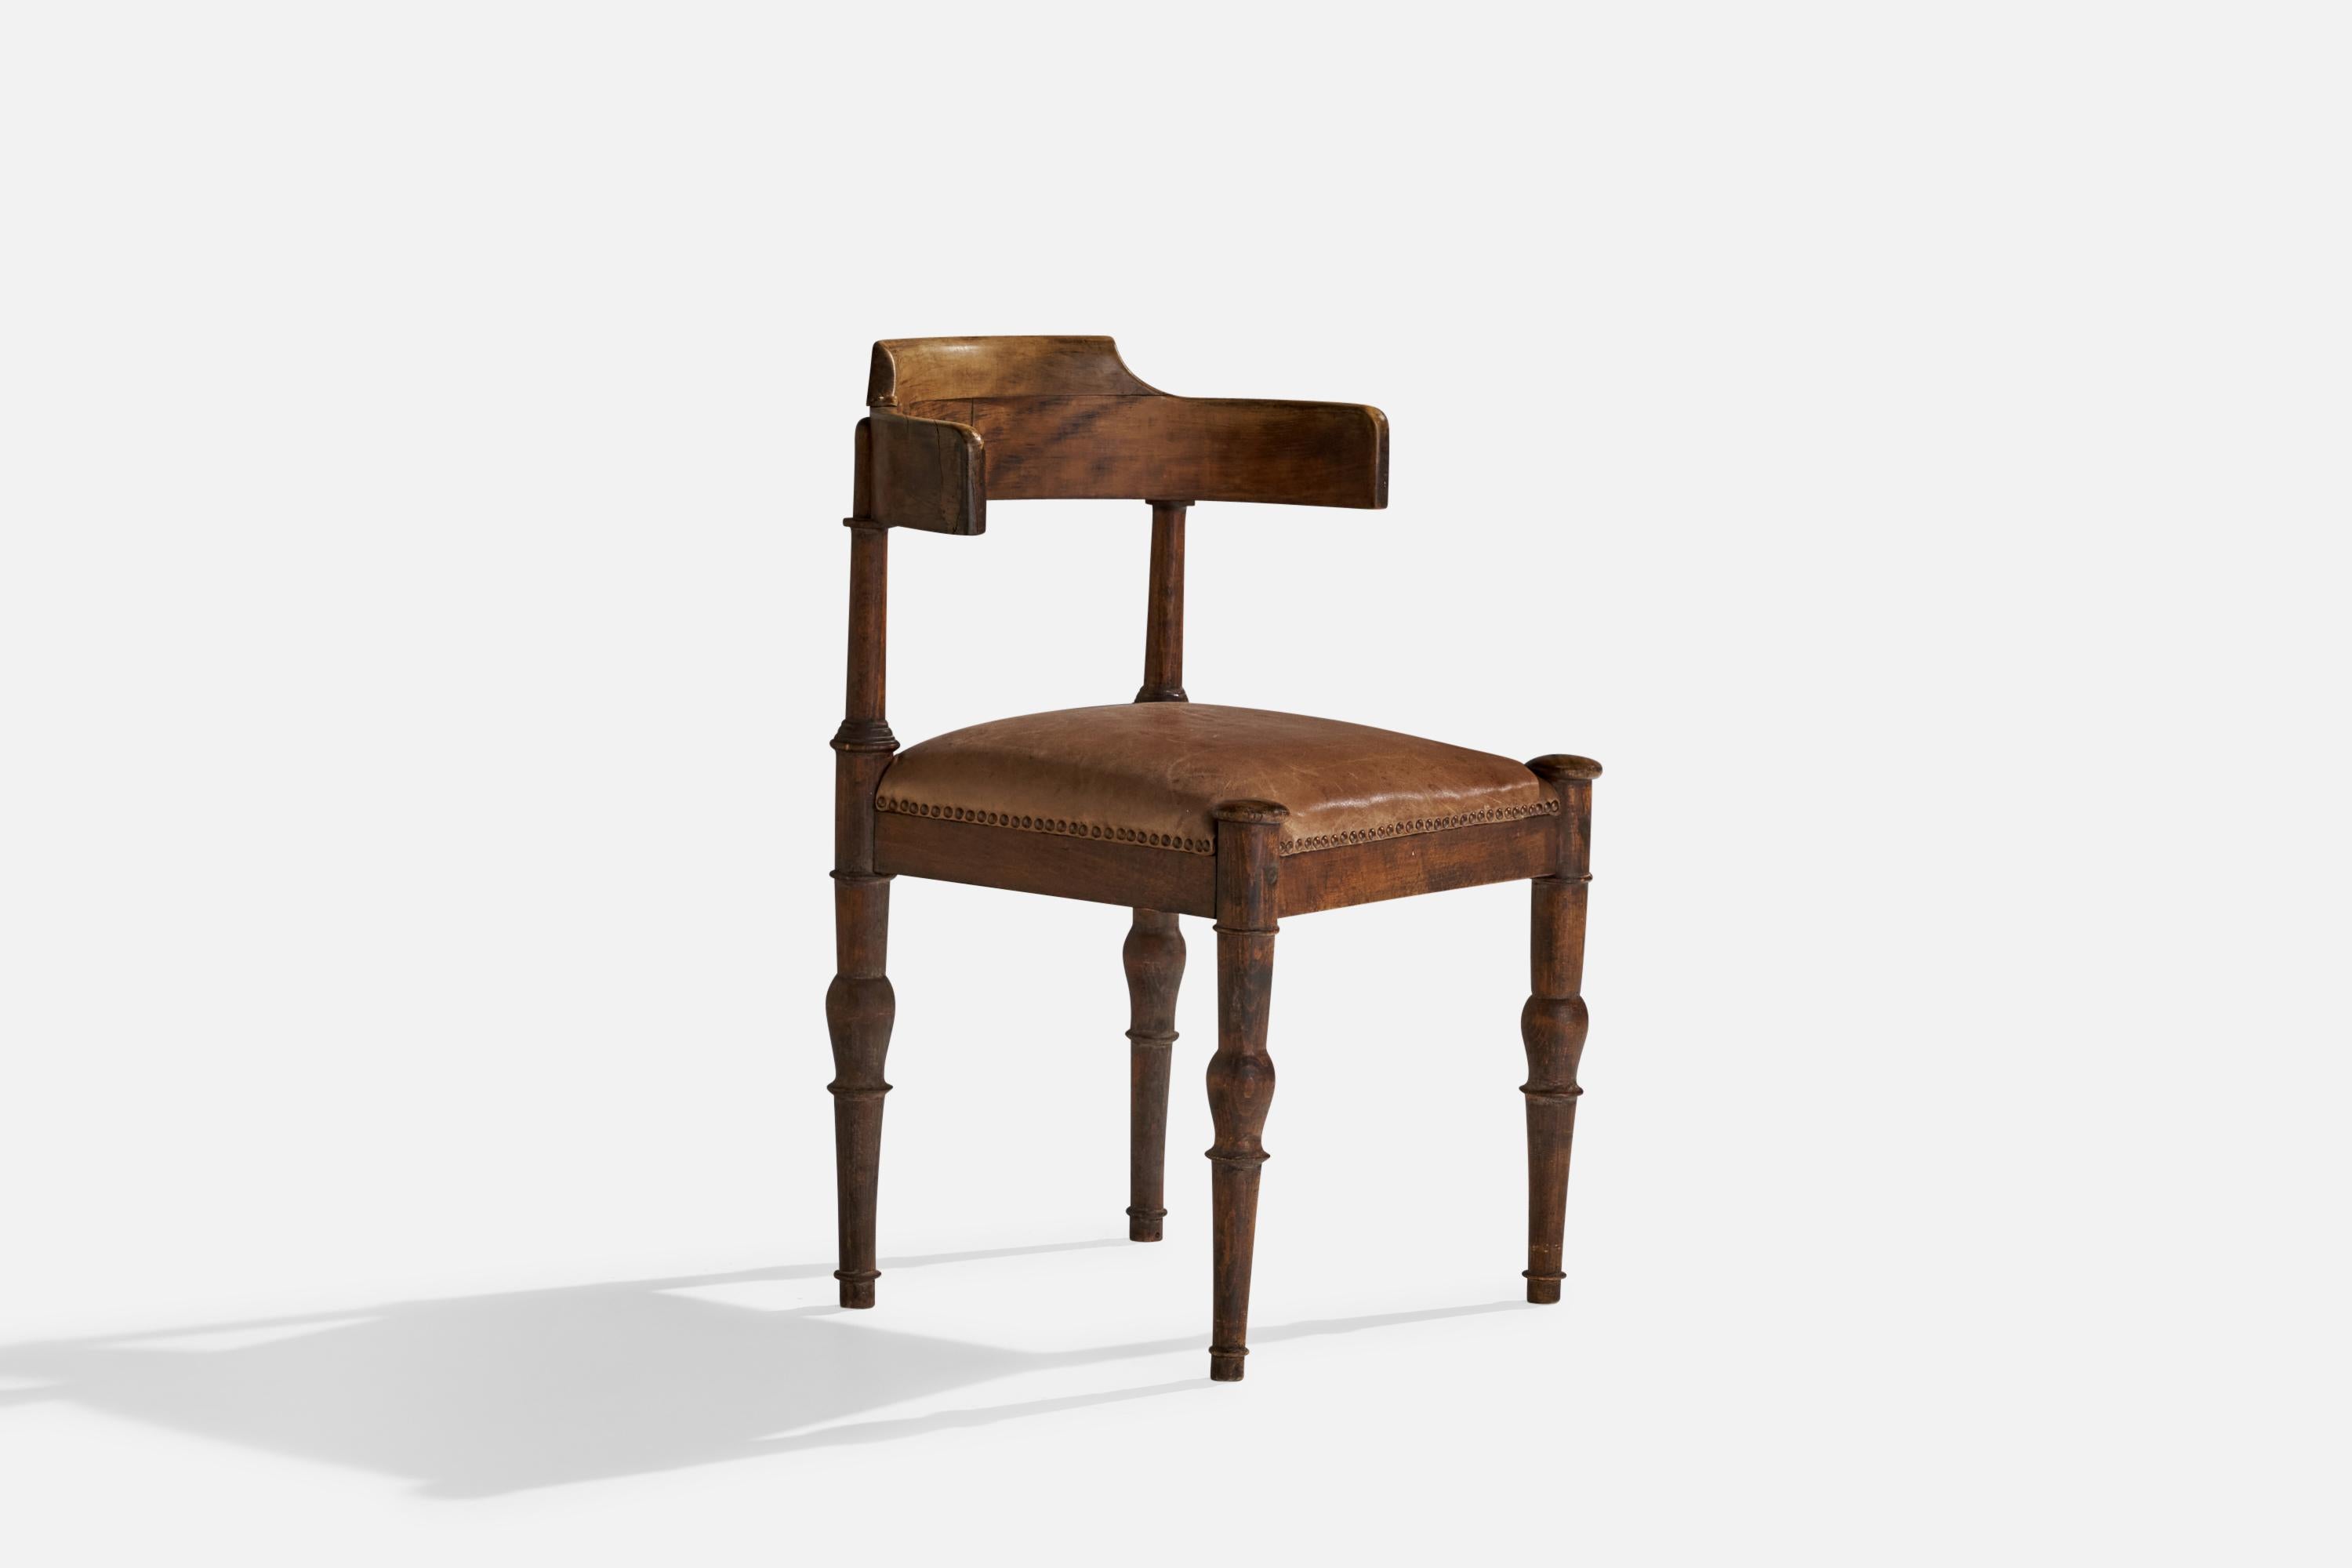 A leather and wood side chair designed and produced by Thorvald Bindesbøll, Denmark, c. 1900.

seat height 19”.